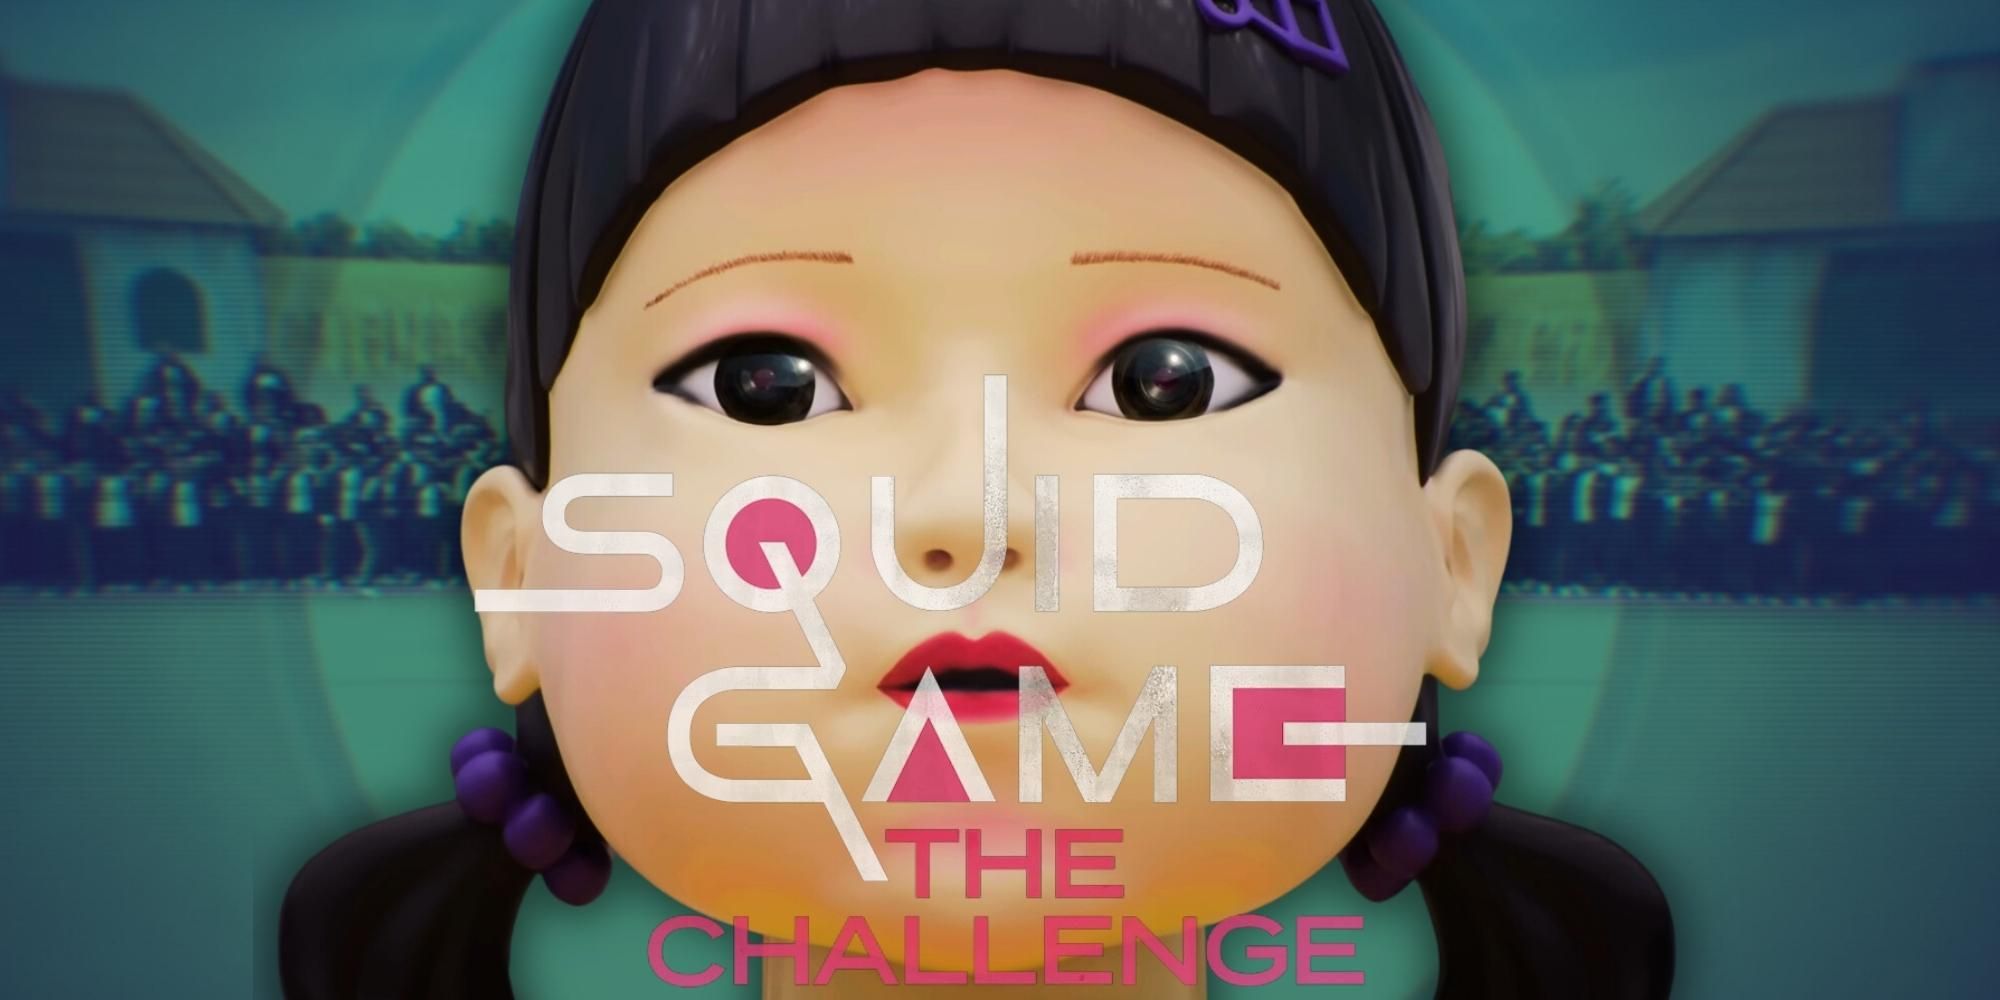 Squid Game: The Challenge Interview: Lorenzo On Developing Strategy & Making Aliiances